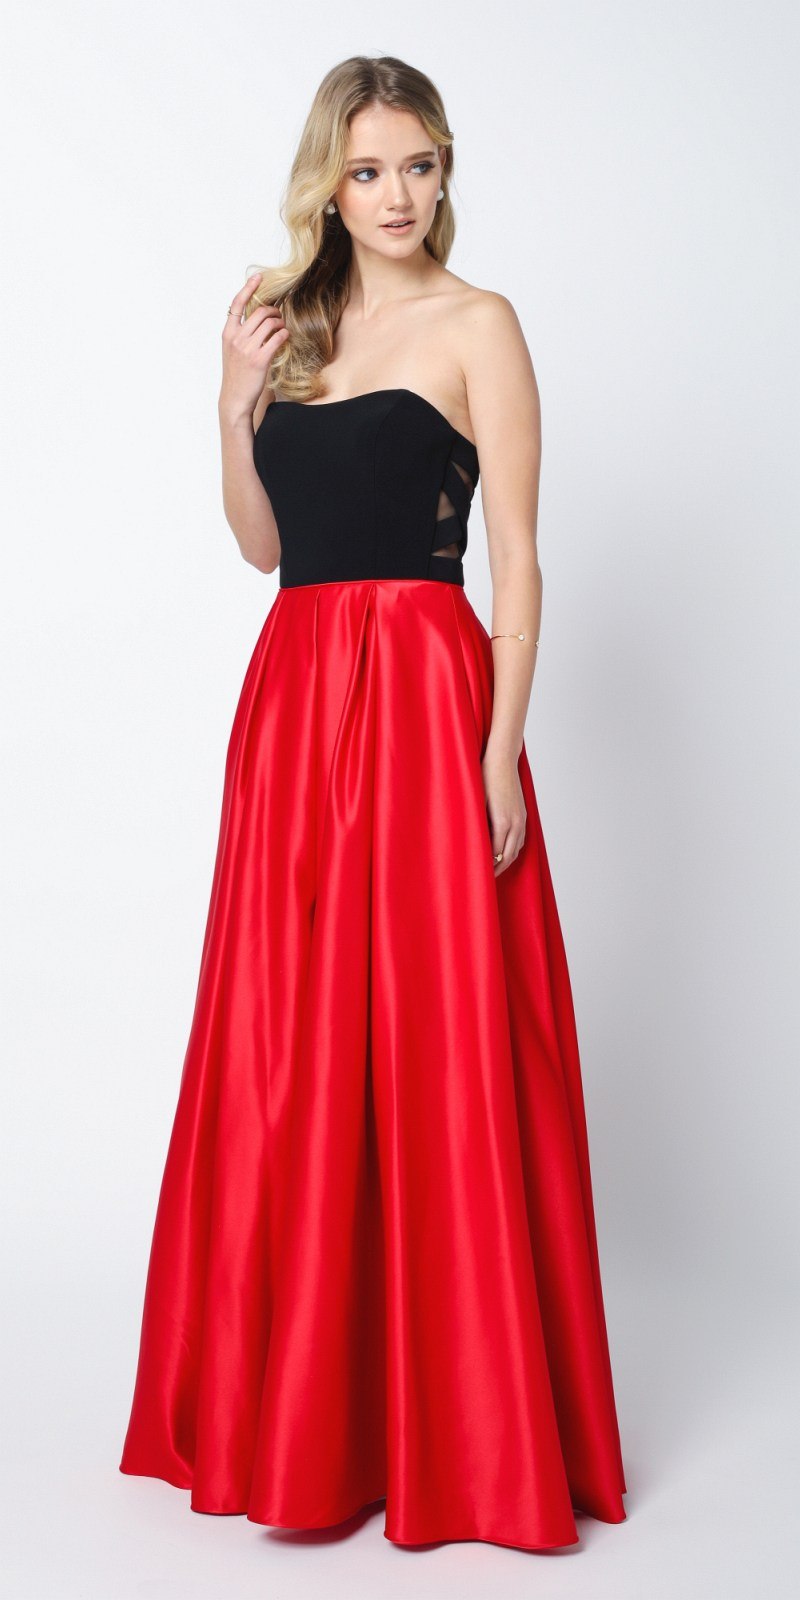 Juliet 694 Two Tone Sweetheart Ball Gown Style Prom Dress Black/Red